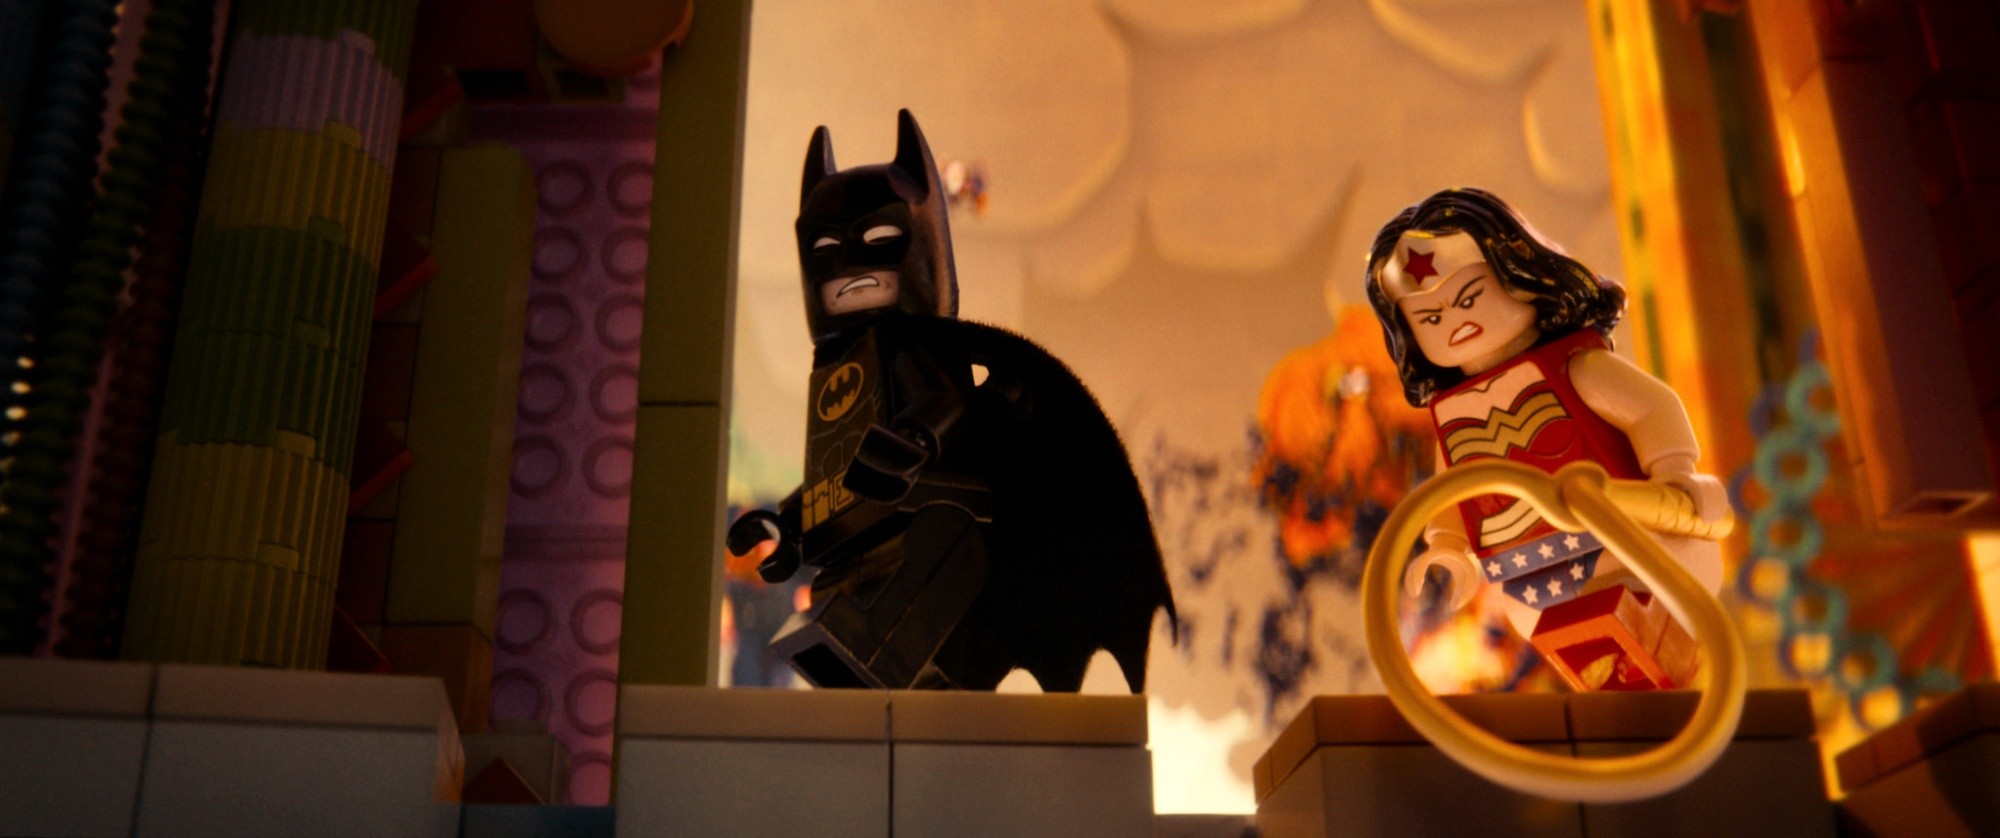 Batman and Wonder Woman from Warner Bros. Pictures' The Lego Movie (2014)